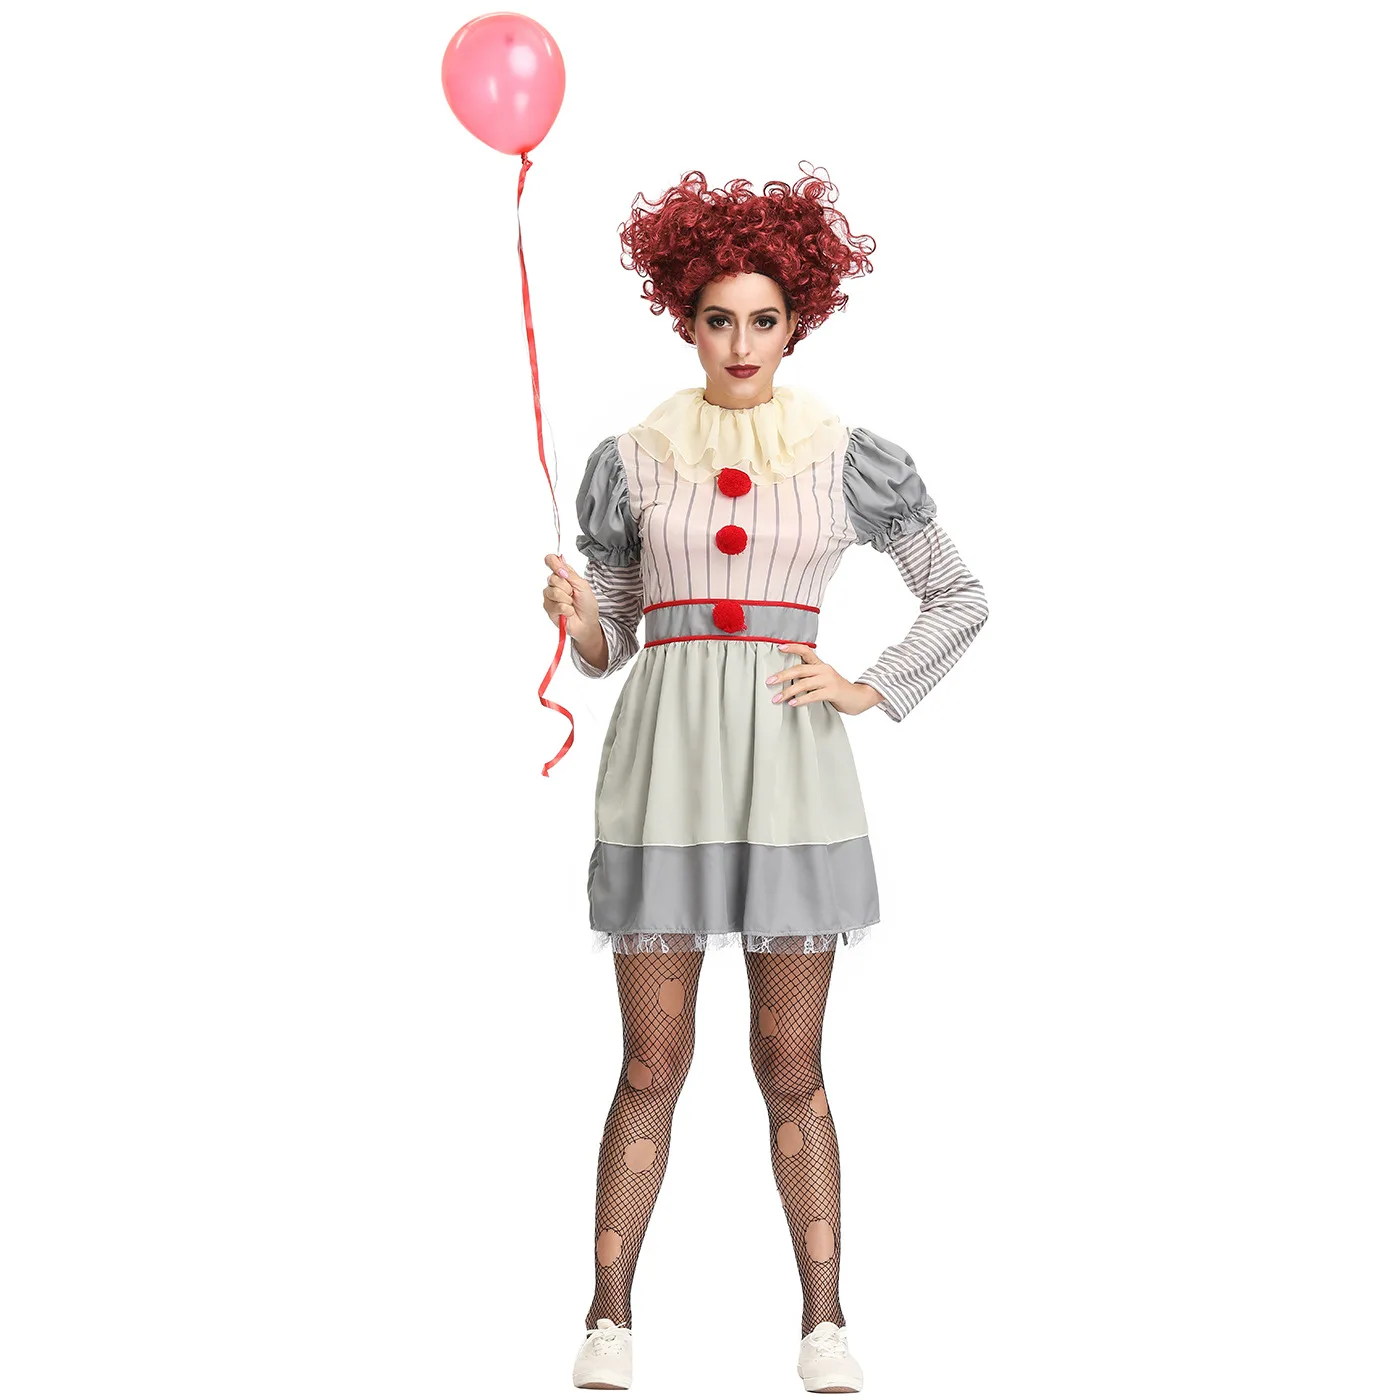 Women Pennywise Joker Clown Costume Movie Adult It Scary Clown Cotume For Halloween Carnival Fantasy Party Outfit